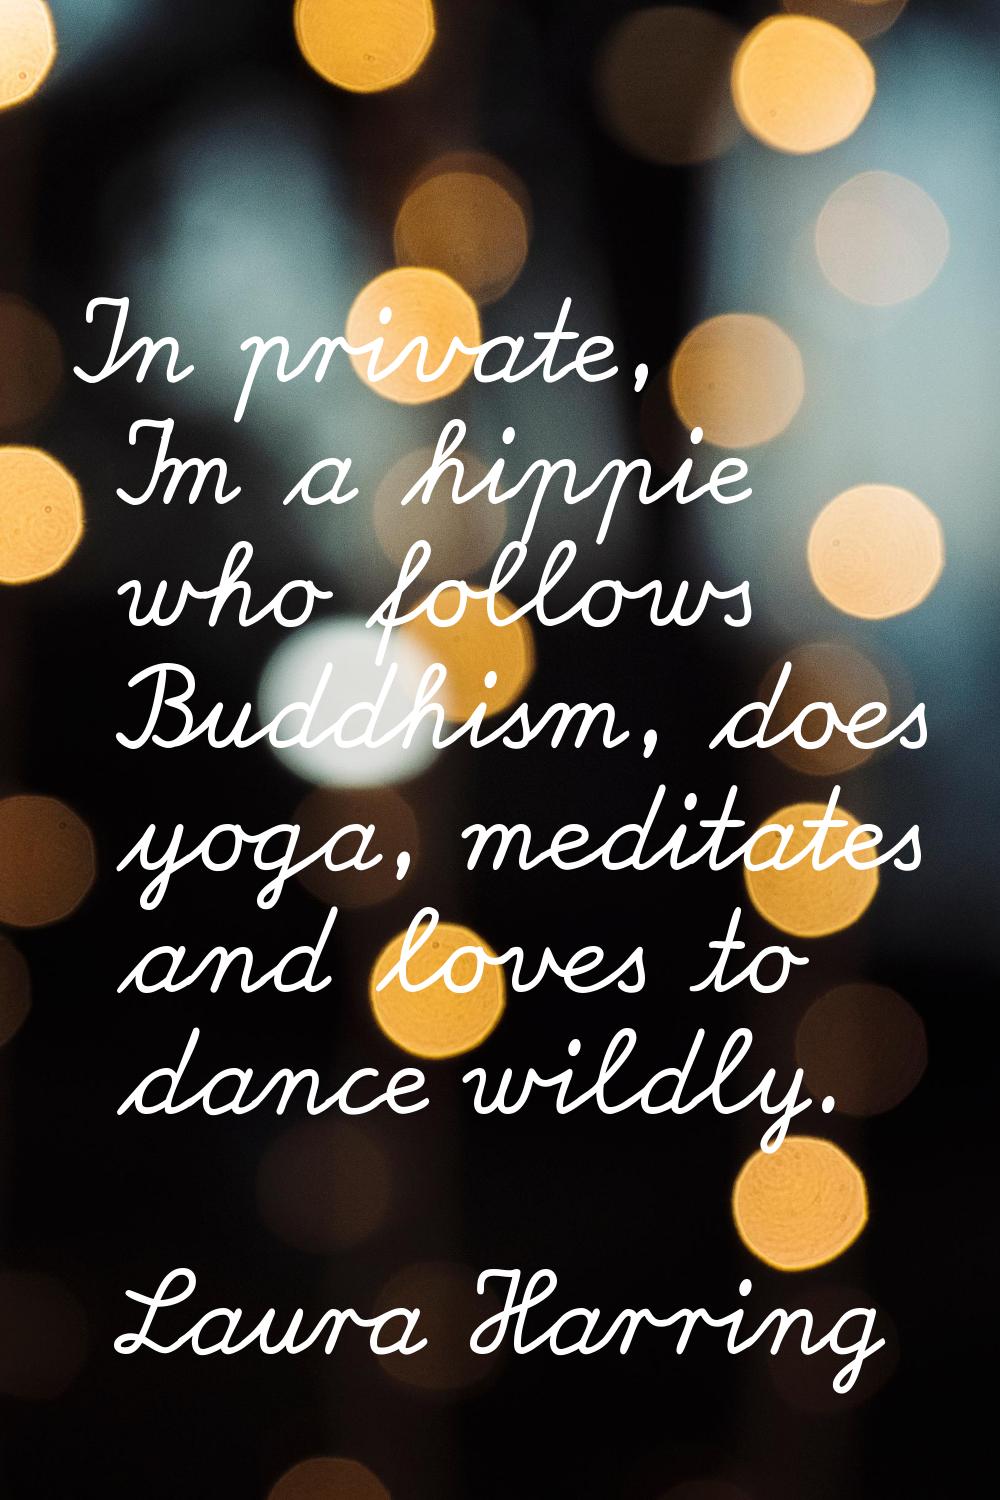 In private, I'm a hippie who follows Buddhism, does yoga, meditates and loves to dance wildly.